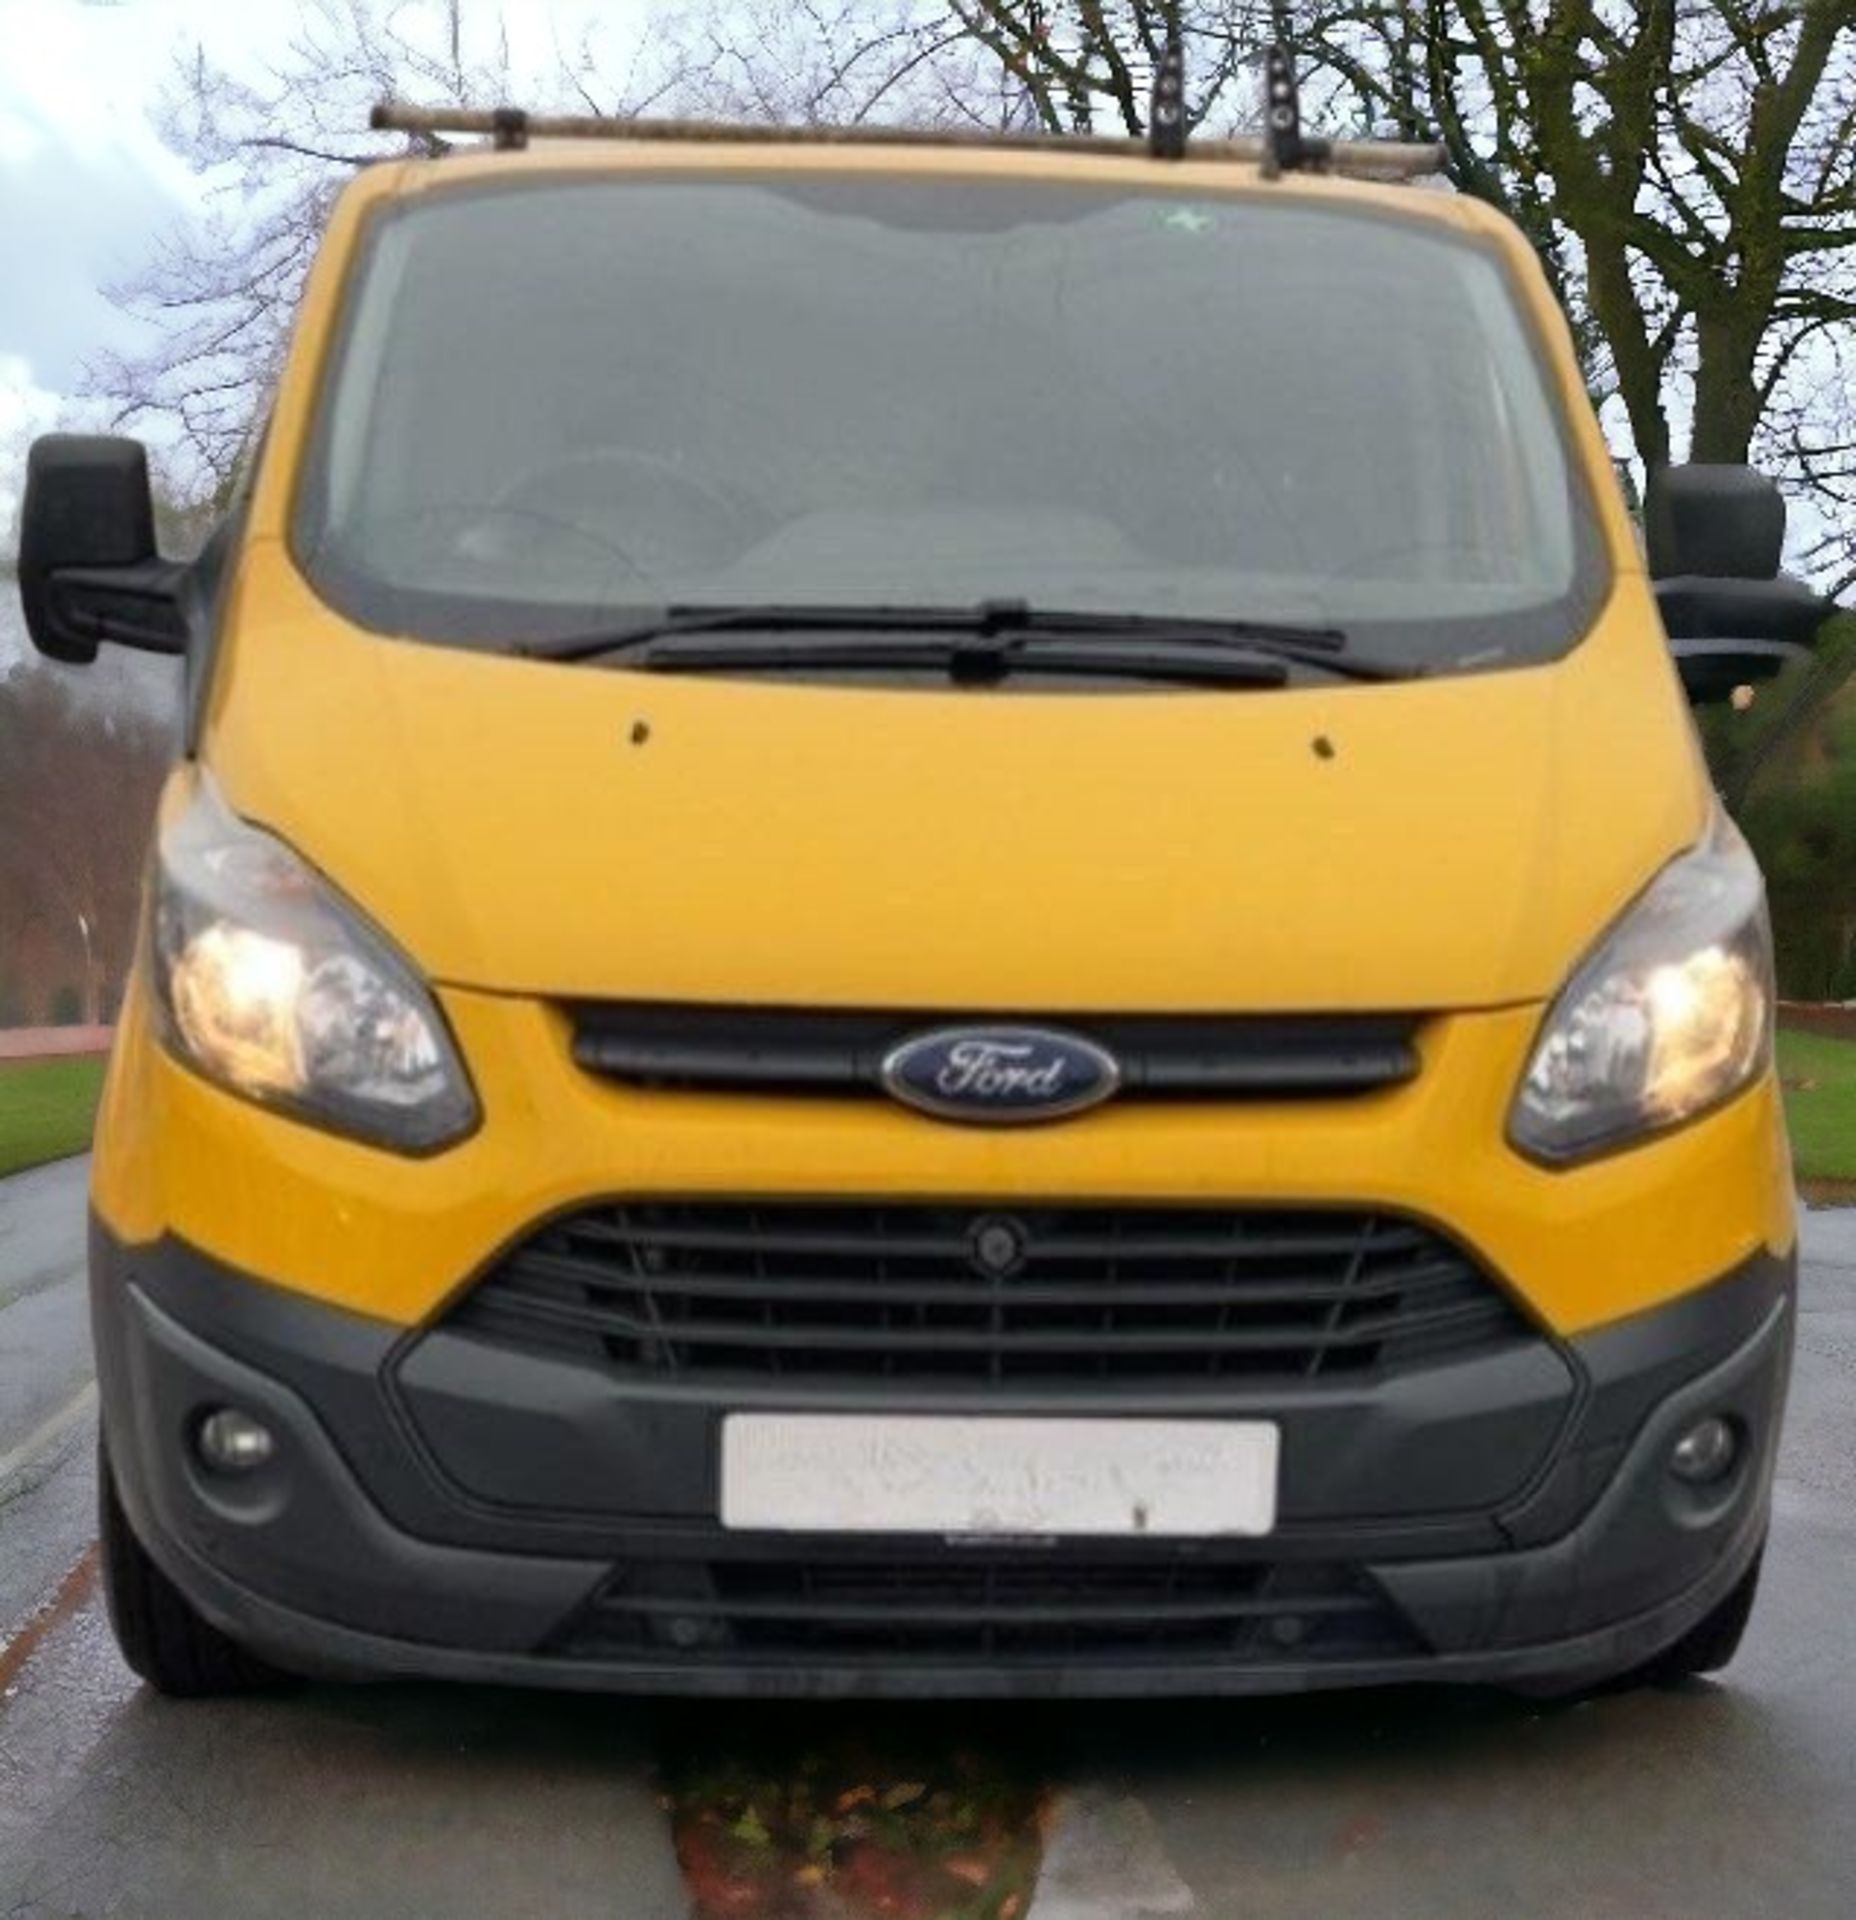 2015 FORD TRANSIT CUSTOM PANEL VAN - EXCEPTIONALLY MAINTAINED WORKHORSE - Image 2 of 14